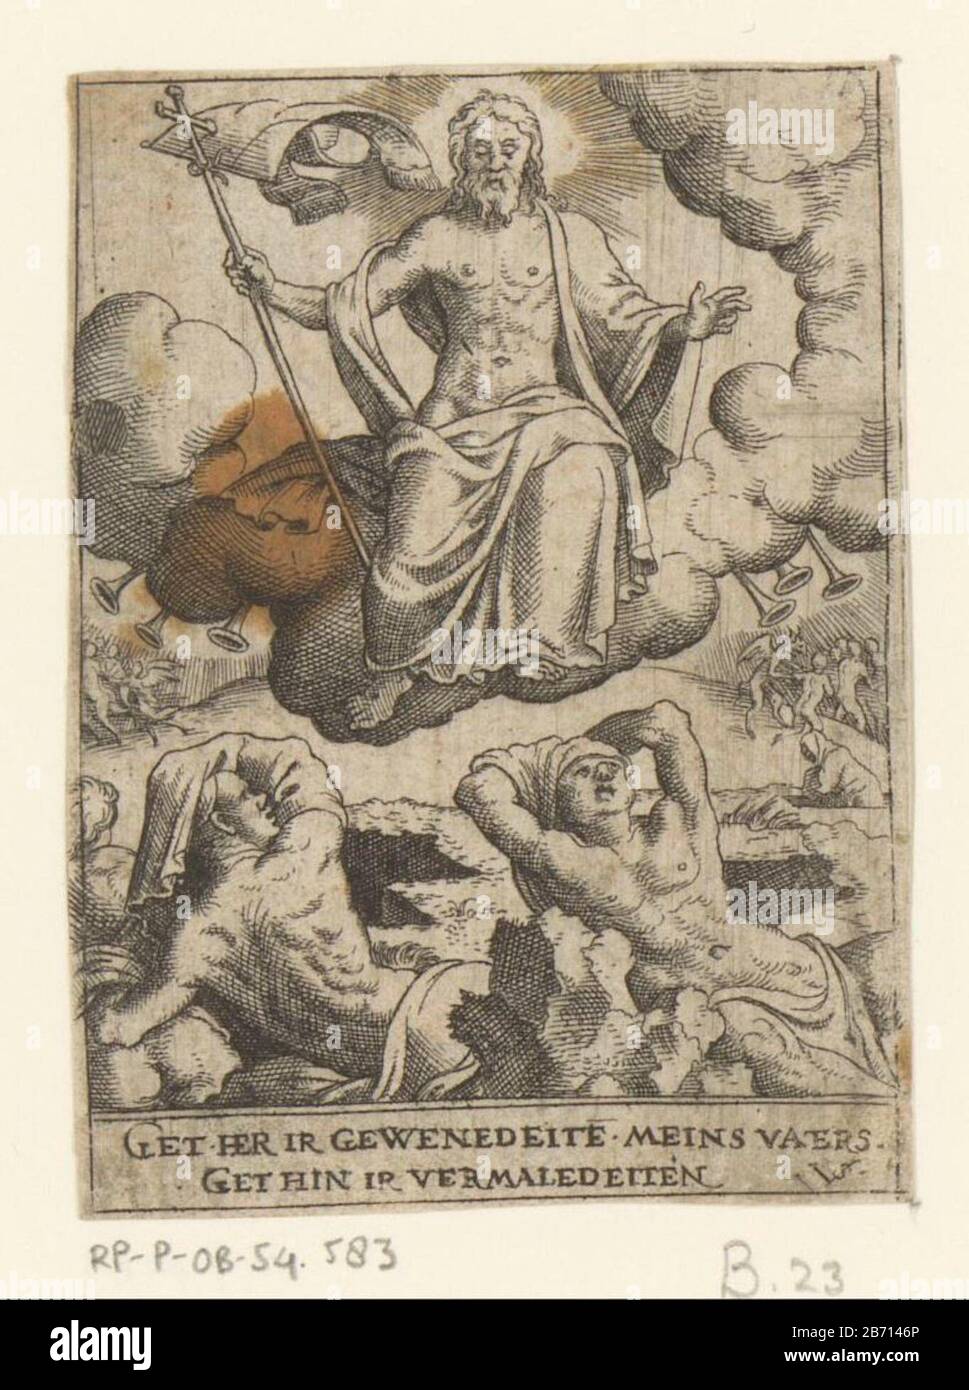 Laatste Oordeel Last Judgment Object Type: picture Item number: RP-P-OB-54.583Catalogusreferentie: Hollstein German 76 Inscriptions / Brands: collector's mark, verso, stamped: Lugt 2228nummer, verso, handwritten ink in brown '76' Manufacturer : printmaker : Virgil Solis (listed property) Place manufacture: Nuremberg Date: 1524 - 1562 Material: paper Technique: etching / engra (printing process) Dimensions: sheet: h 80 mm (cut inner plate edge) × W 59 mm (cut inner plate edge)  Subject: Latest judgment Stock Photo